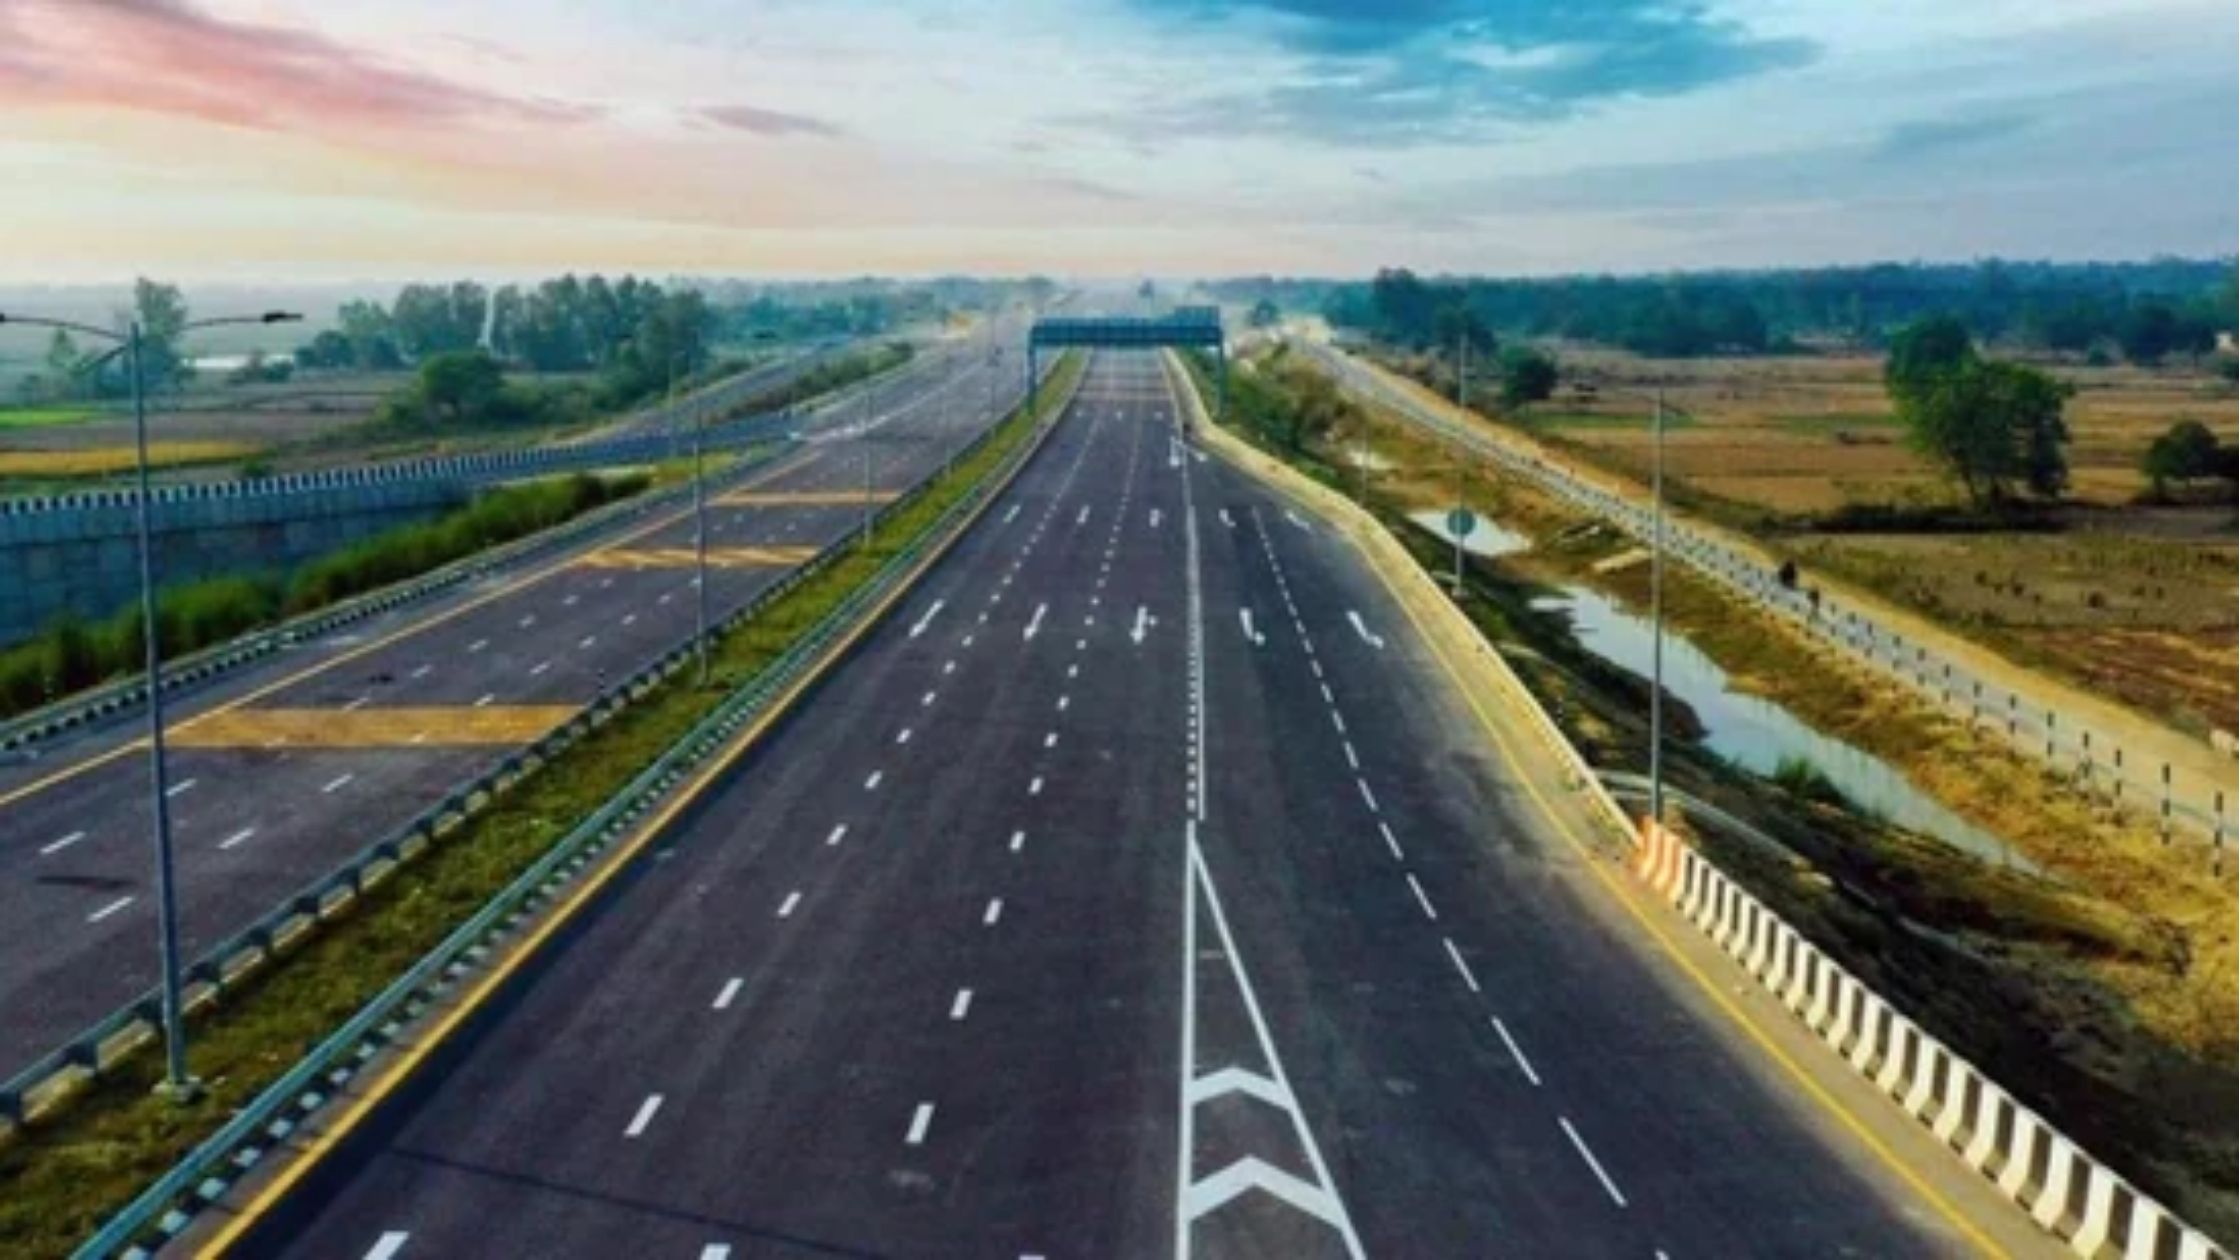 Construction of 4 National Highways will be completed in Bihar in December